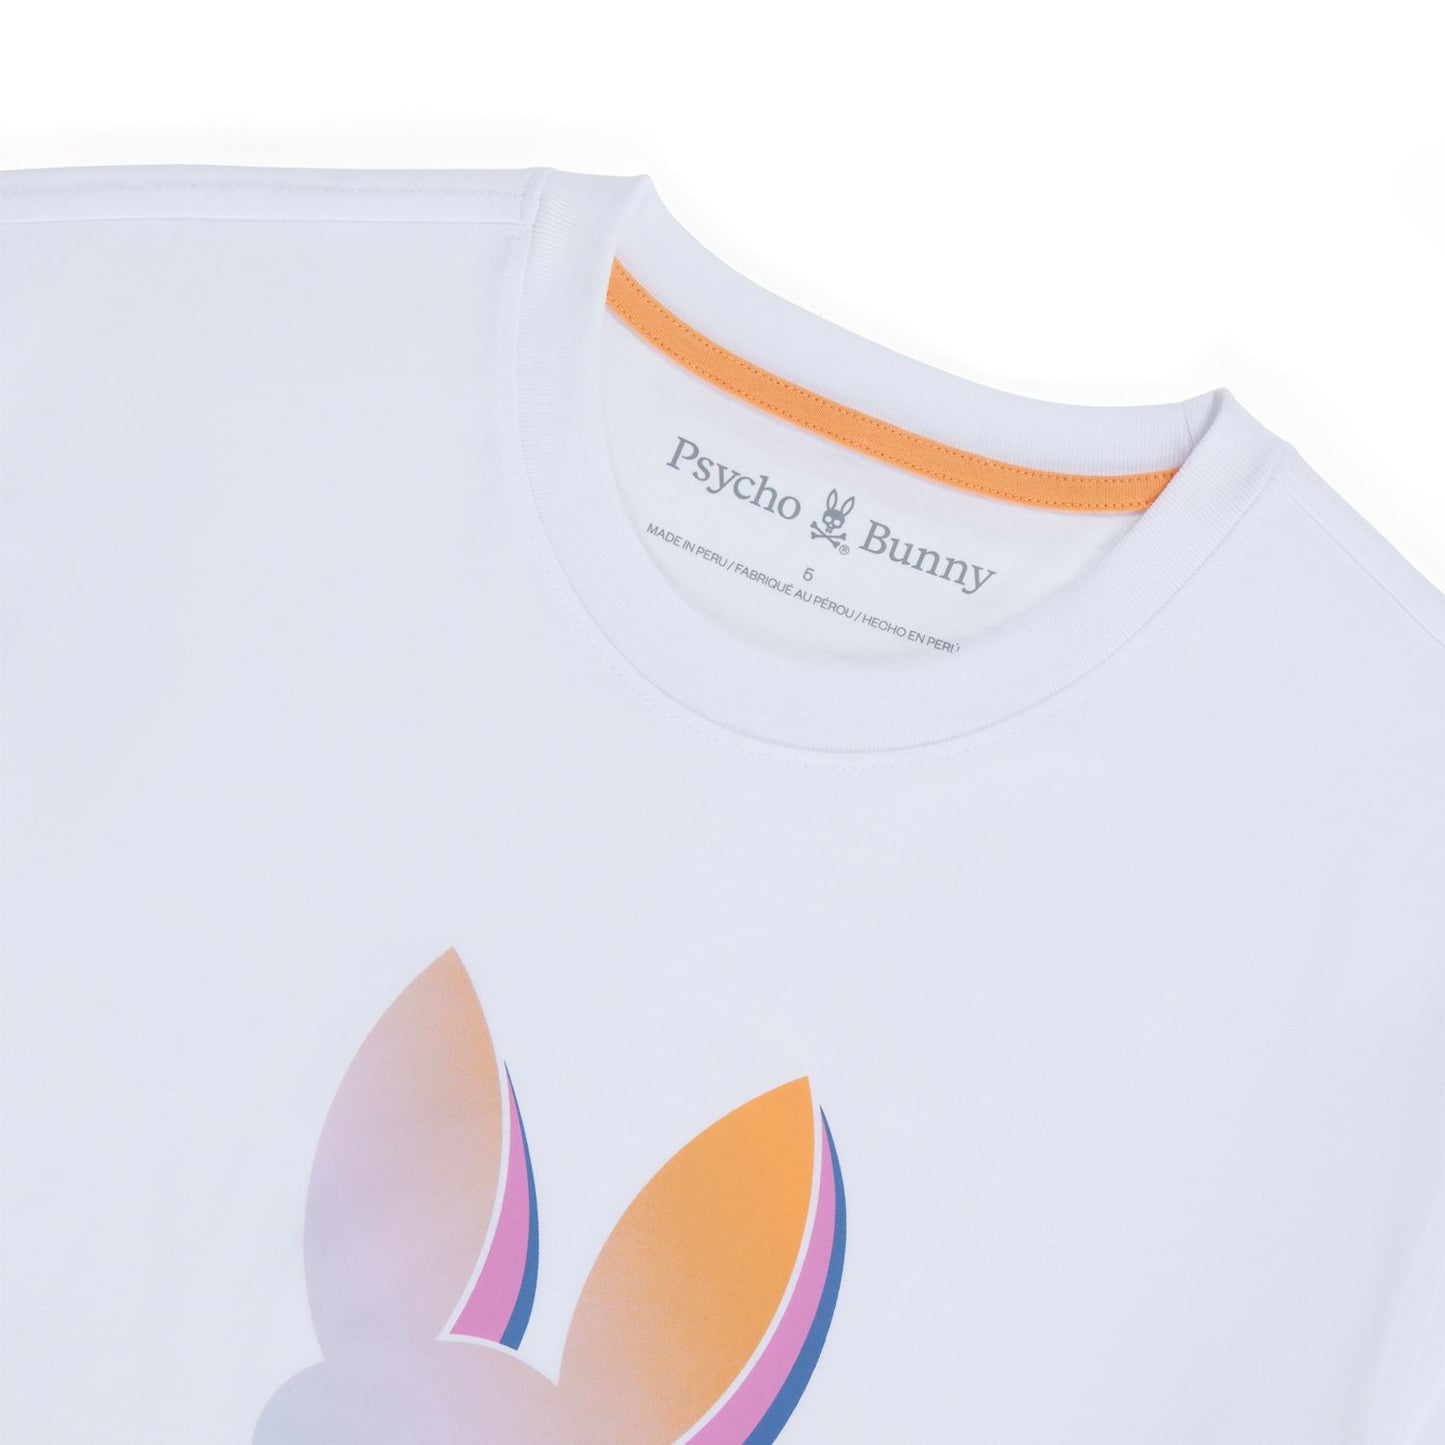 Psycho Bunny Palm Springs Graphic Tee - White